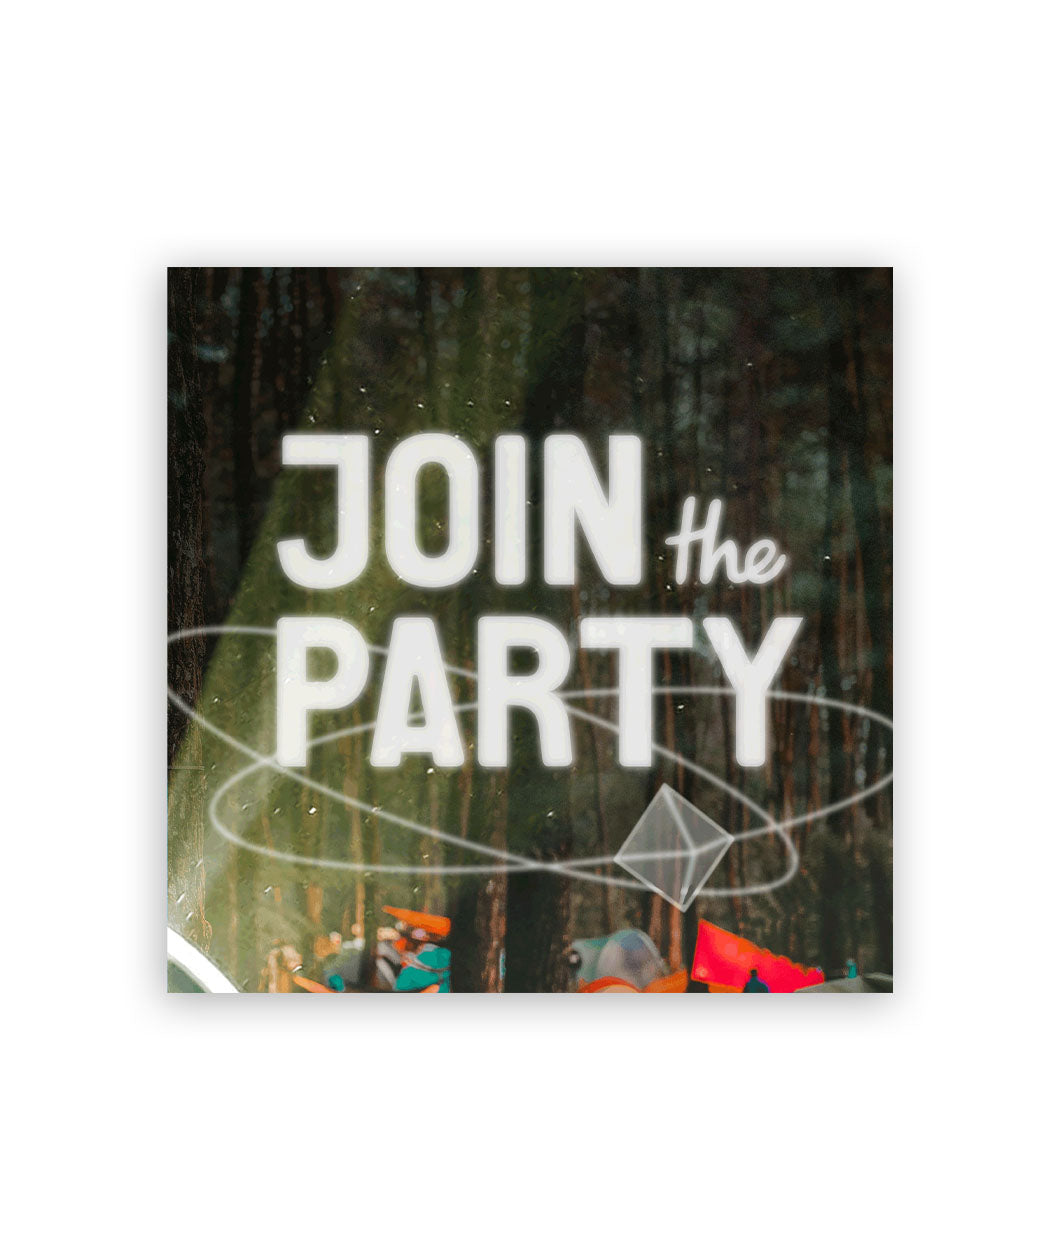 A picture of people camping in the woods is the background to the words "Join the Party" with their logo. 